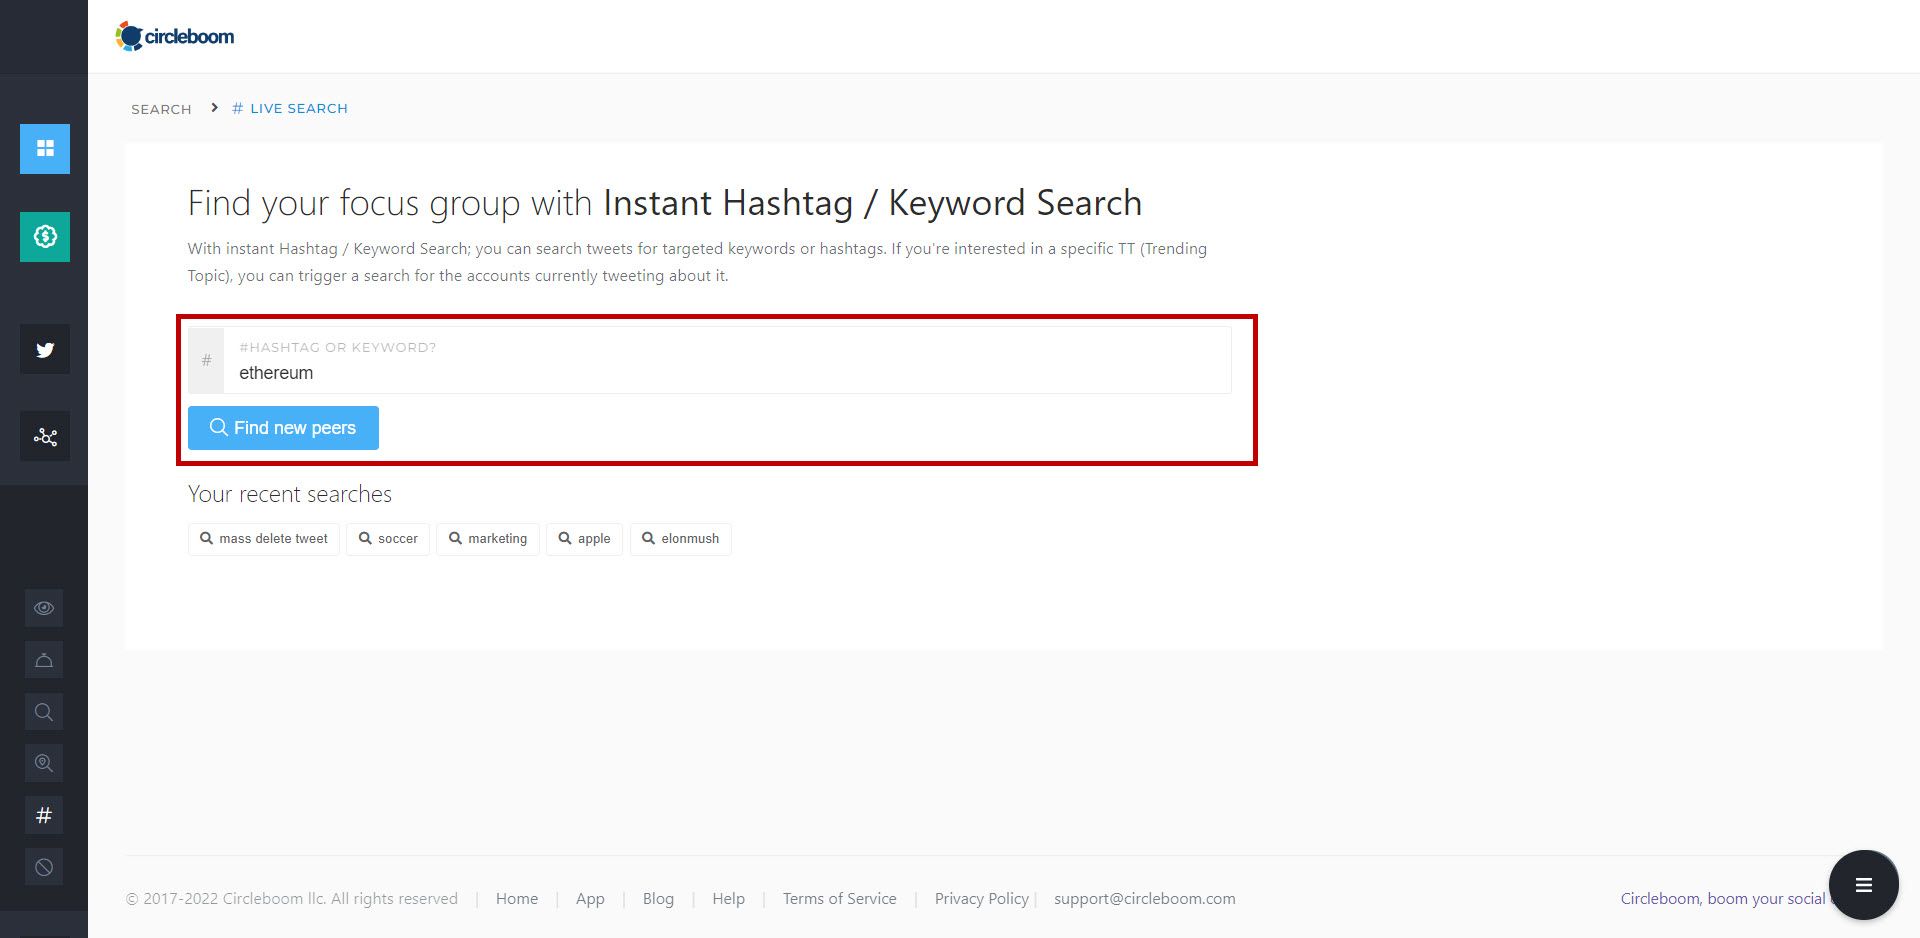 Search hashtags and keywords on Circleboom